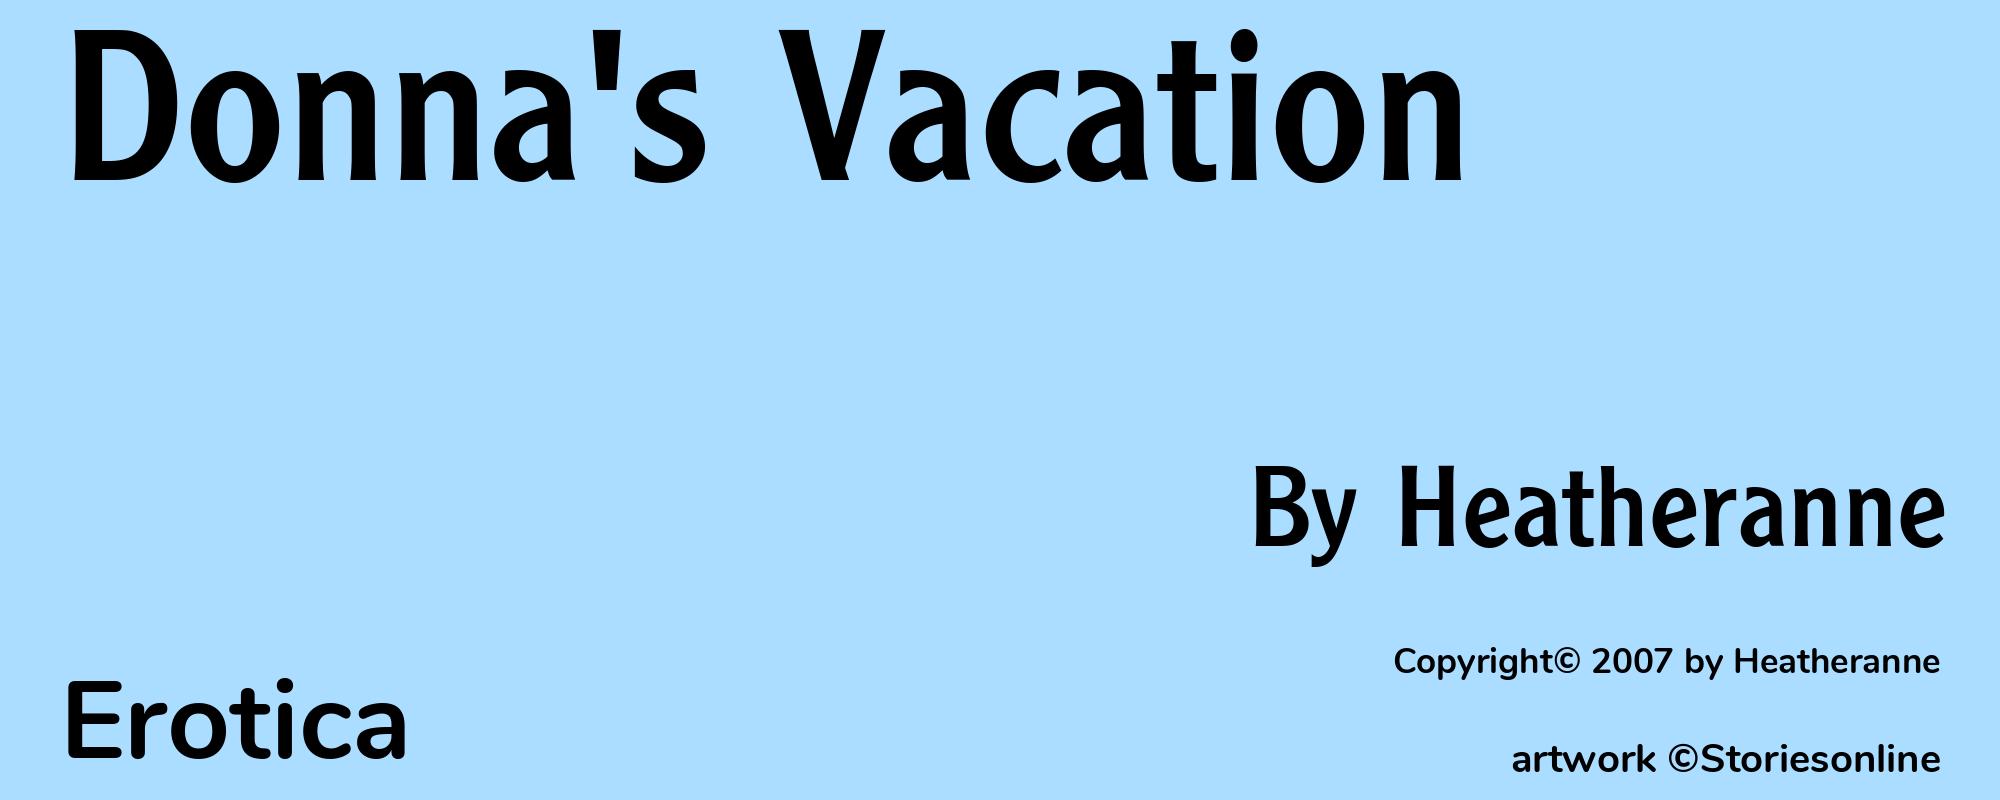 Donna's Vacation - Cover